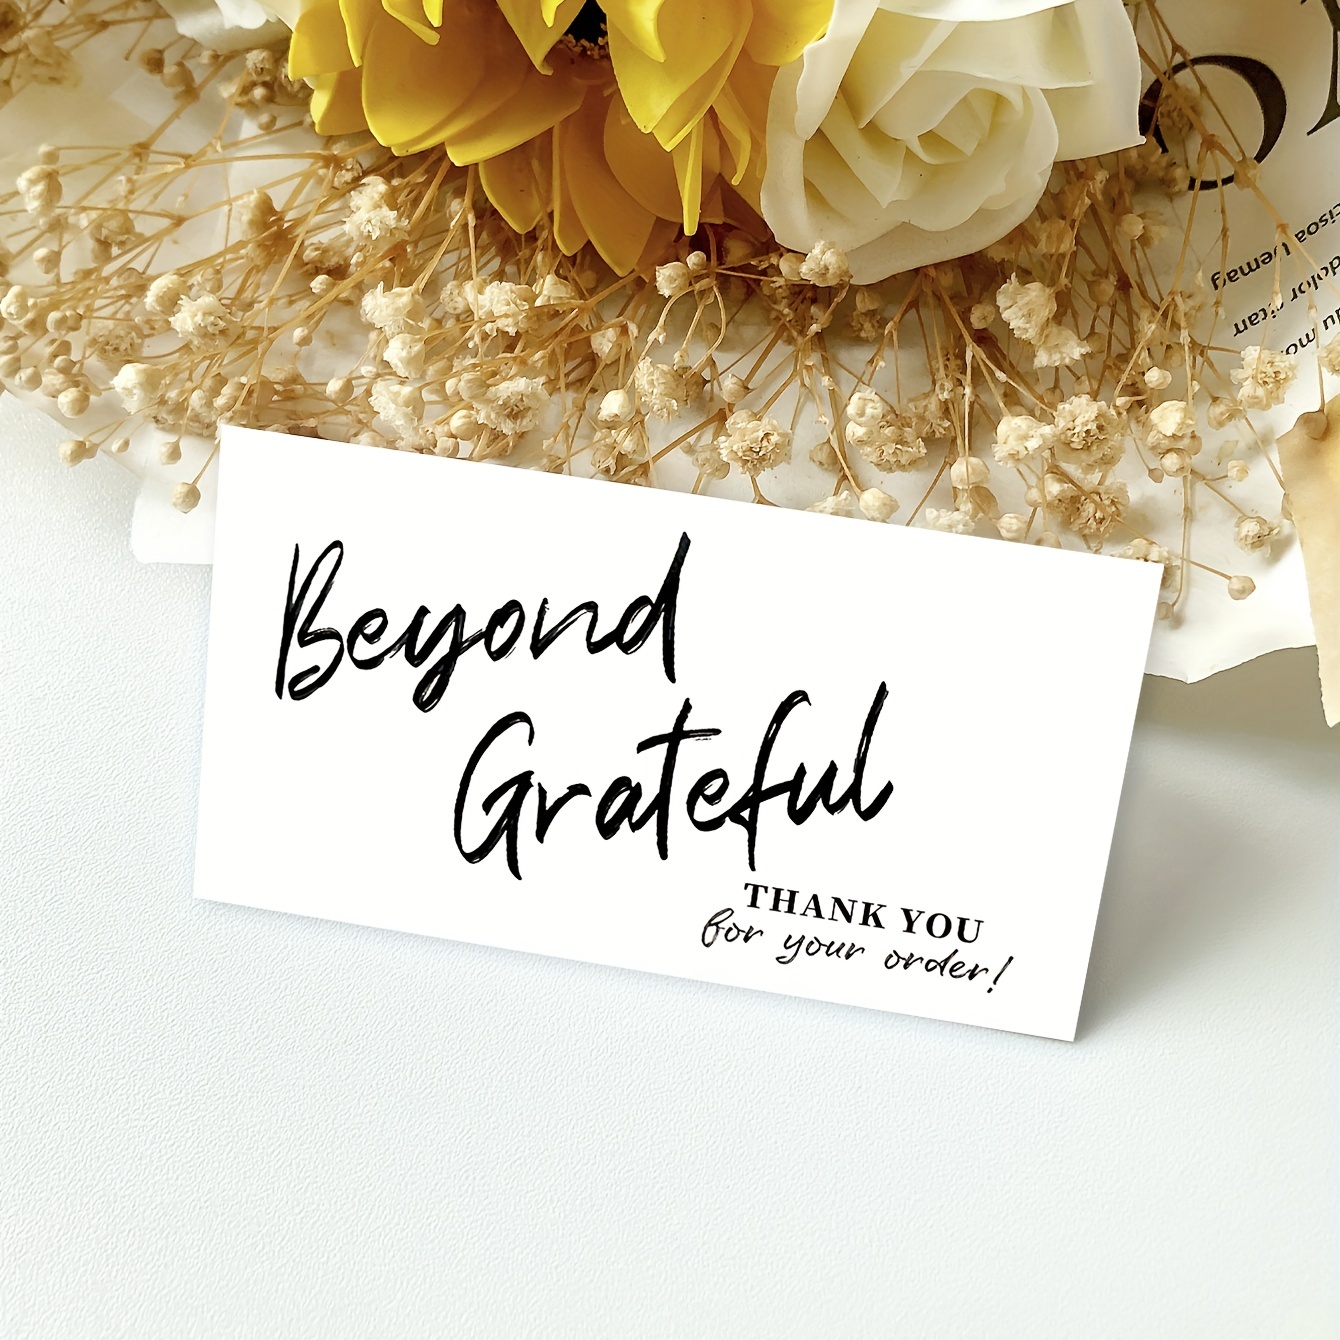  Business Thank You Cards - Small Business Essentials